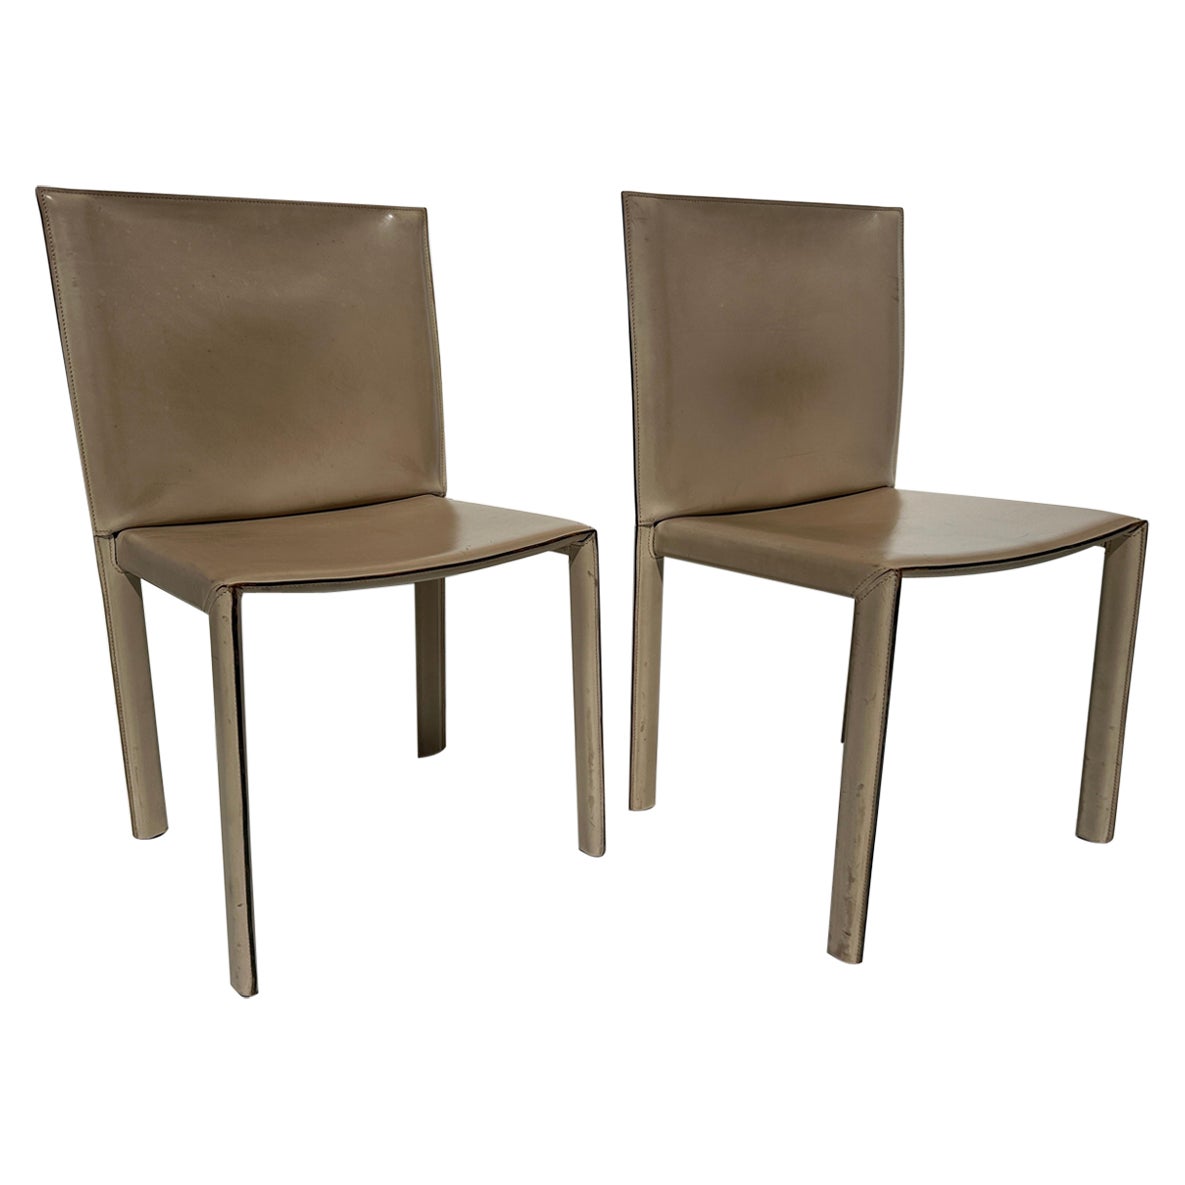 Pair of Patinated Leather Side Chairs by Enrico Pellizzoni For Sale